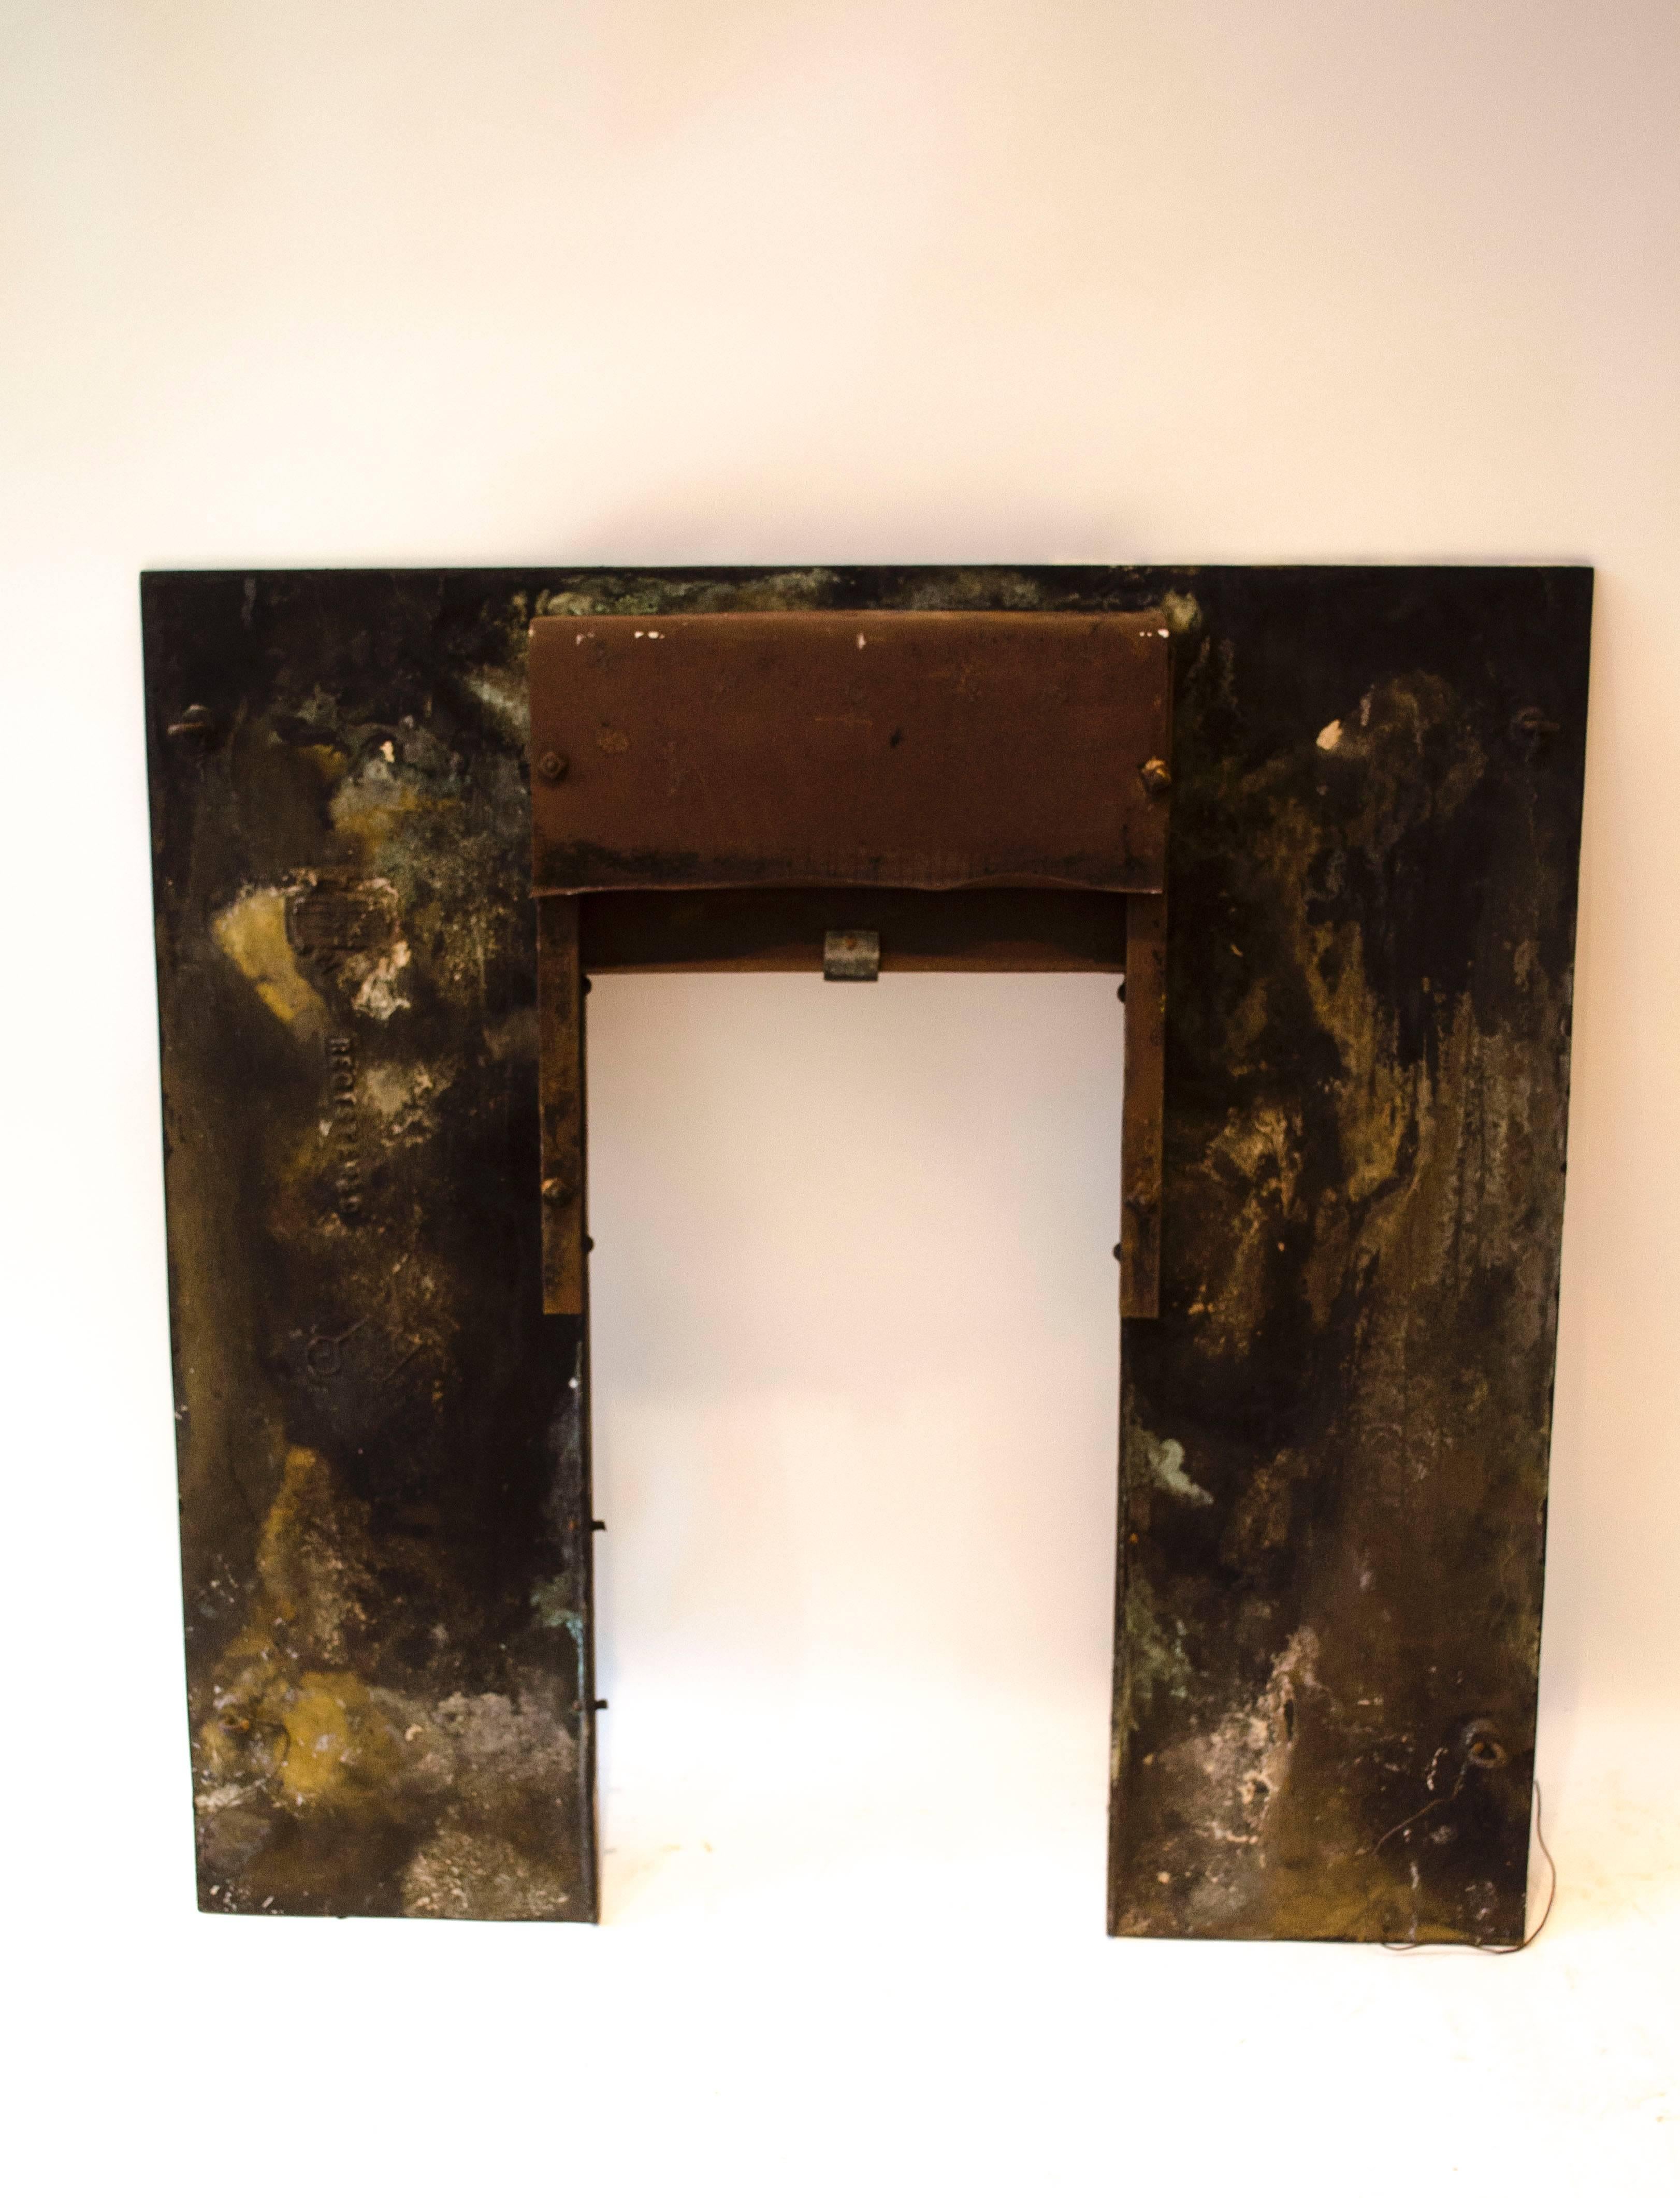 A Rare & Important Anglo-Japanese Cast Brass Fireplace Insert by Thomas Jeckyll 4